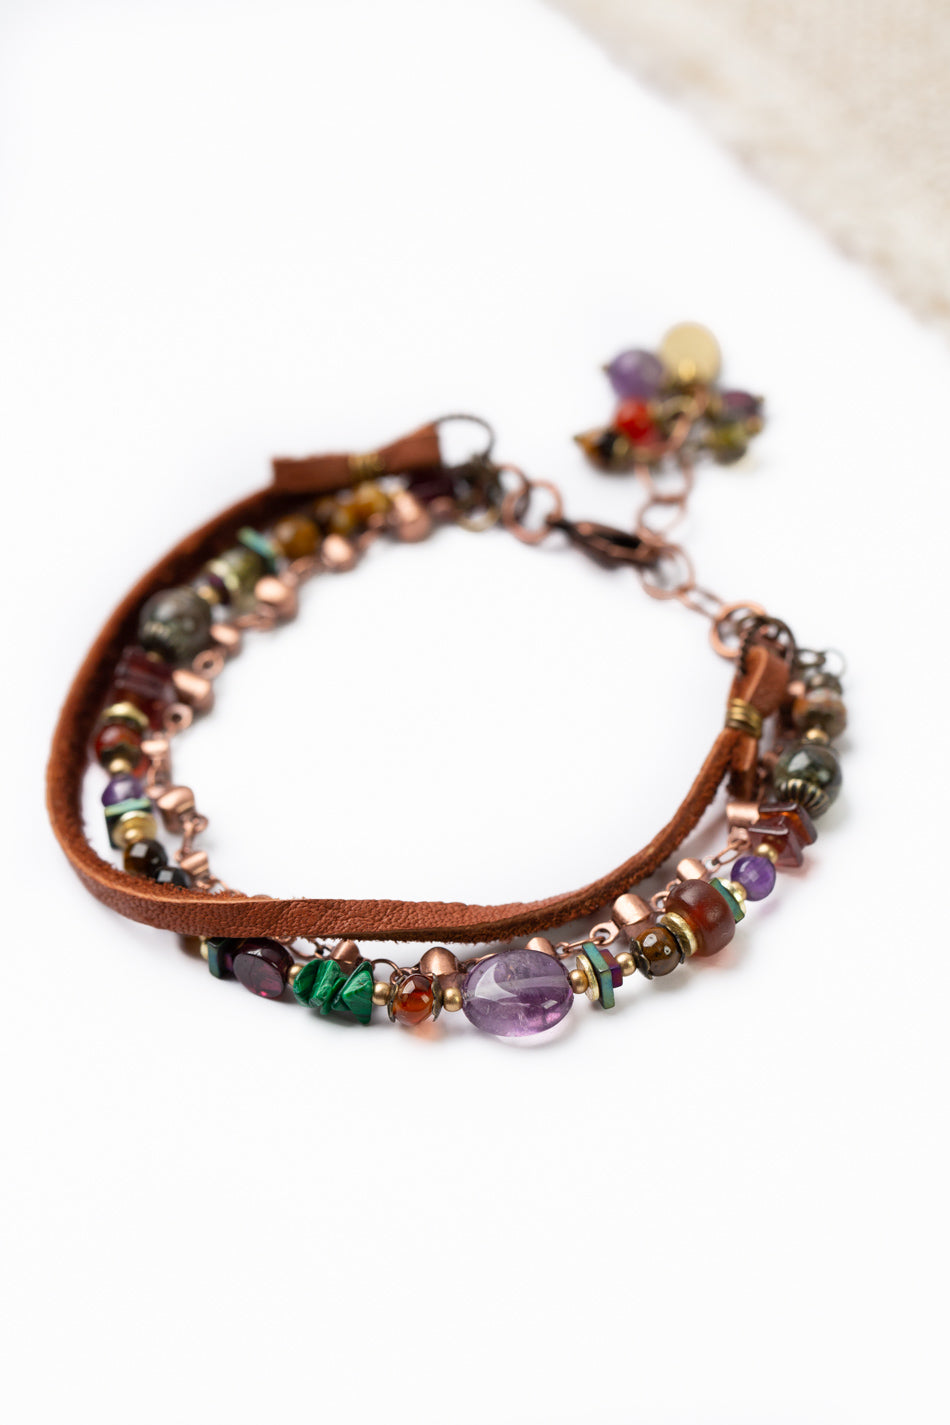 Limited Edition 7-8" Cat's Eye With Amethyst Multistrand Bracelet